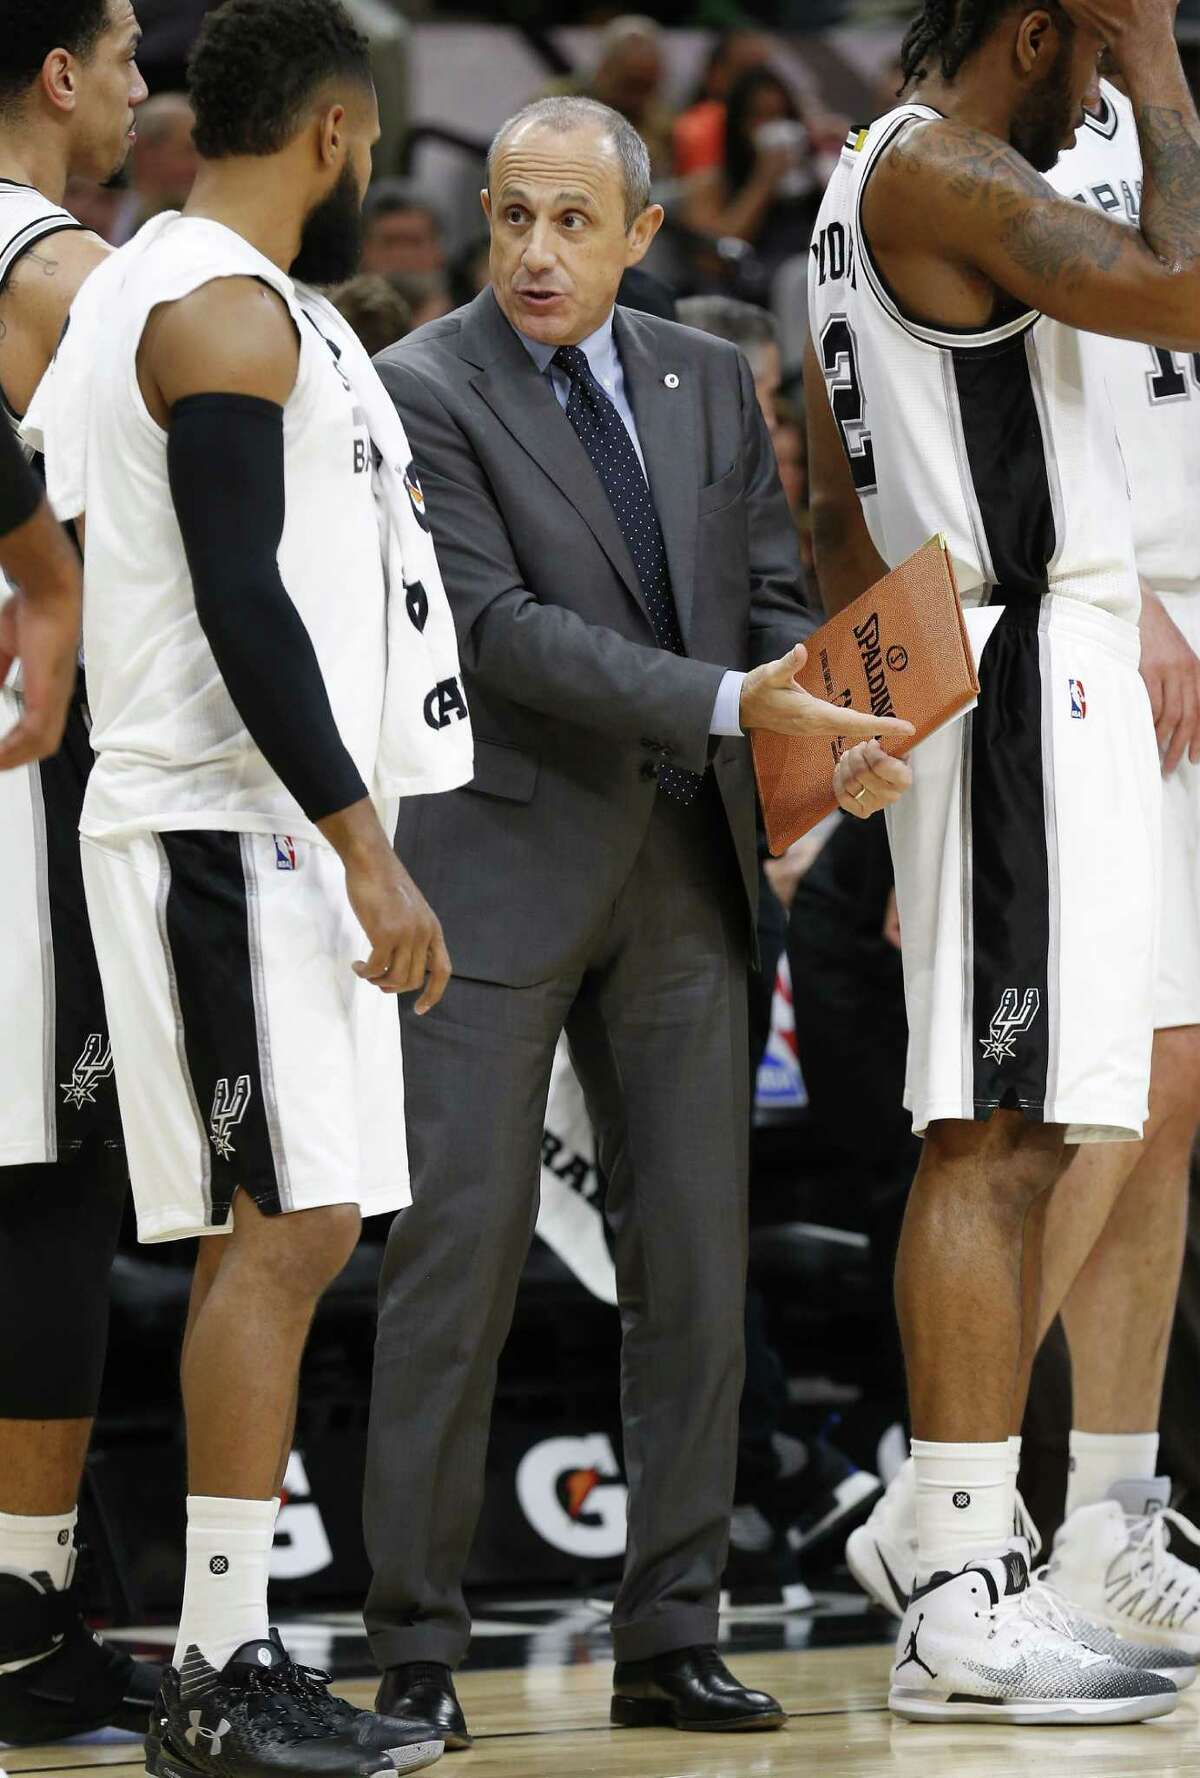 Spurs' assistant coach Ettore Messina (center) talks with Patty Mills (08) during the game against the Orlando Magic at the AT&T Center on Tuesday, Nov. 29, 2016. (Kin Man Hui/San Antonio Express-News)